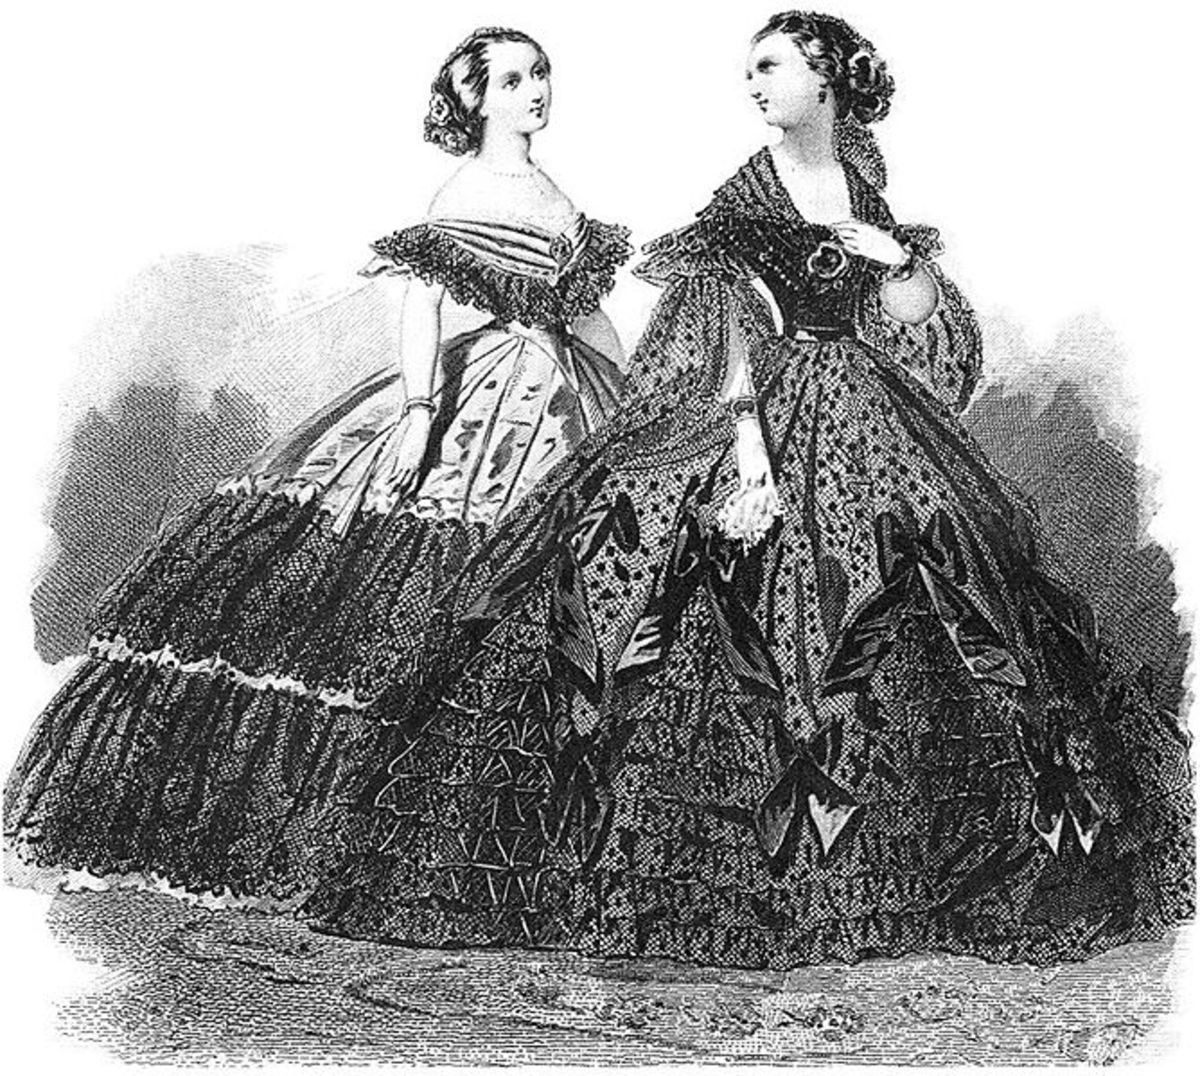 Hoop skirts were one of the creative endeavors that women used to counteract the fabric shortage.